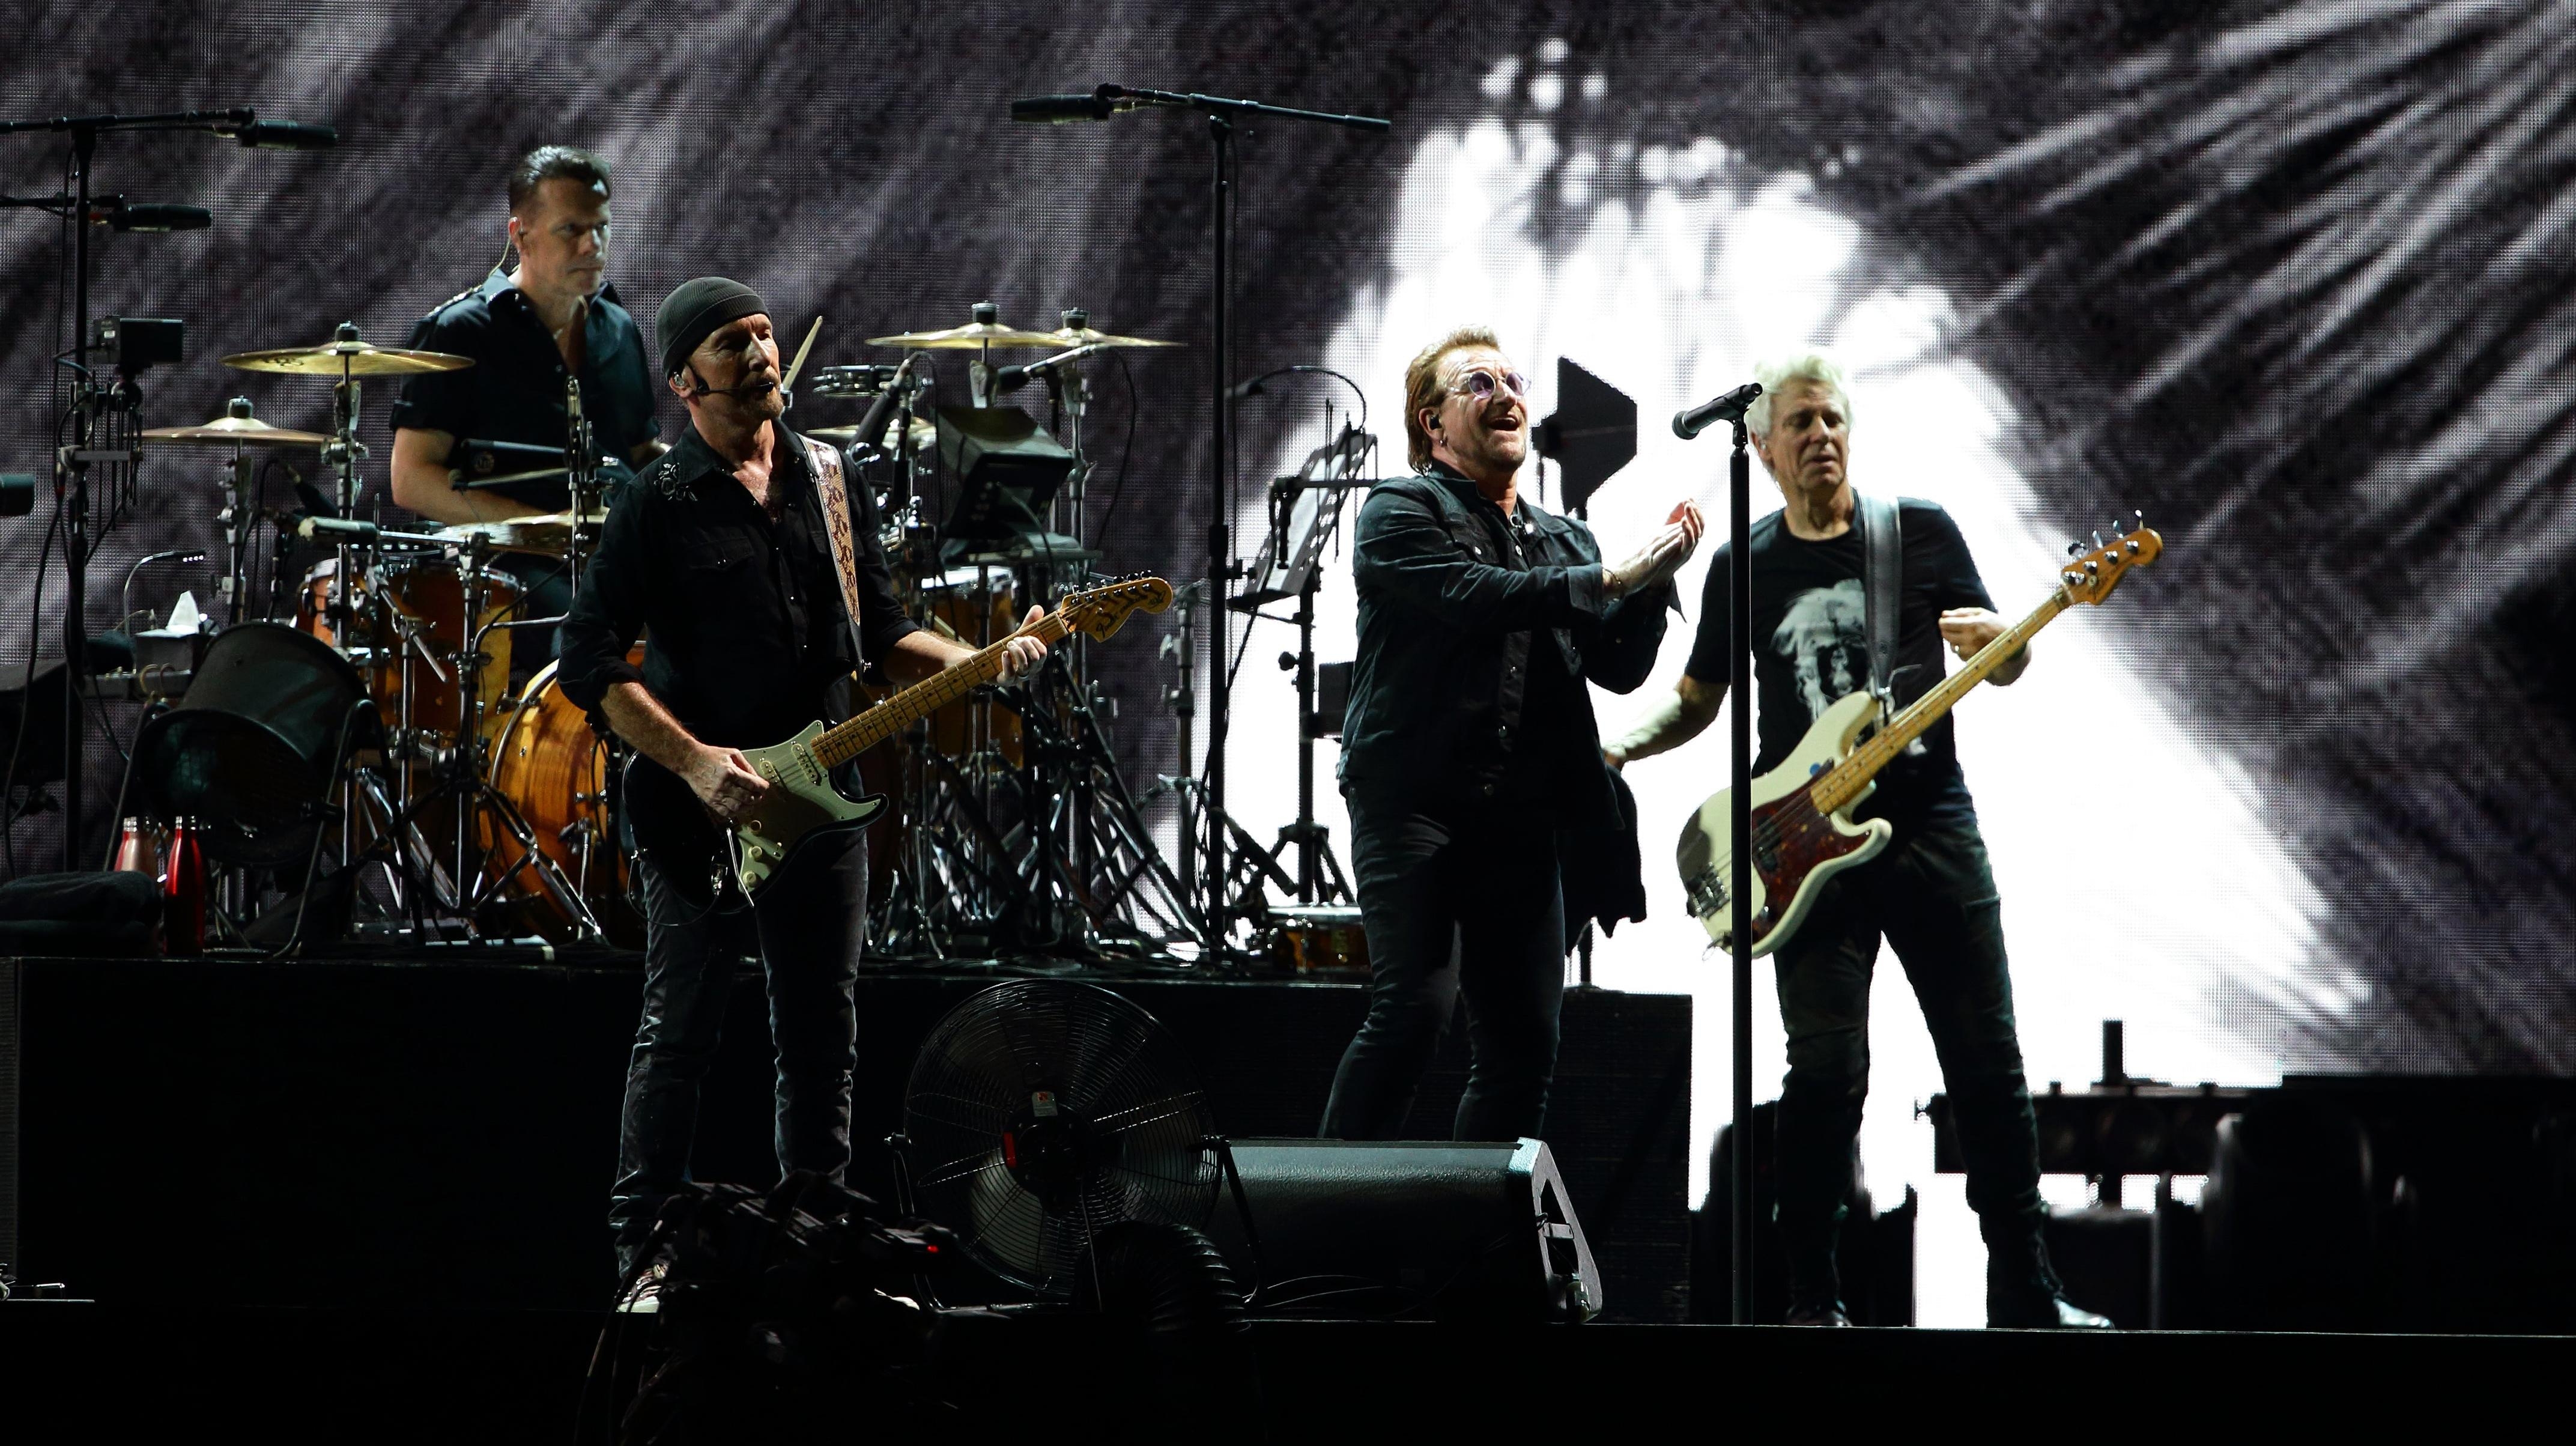 J.J. Abrams is reportedly making a U2 biopic series for Netflix